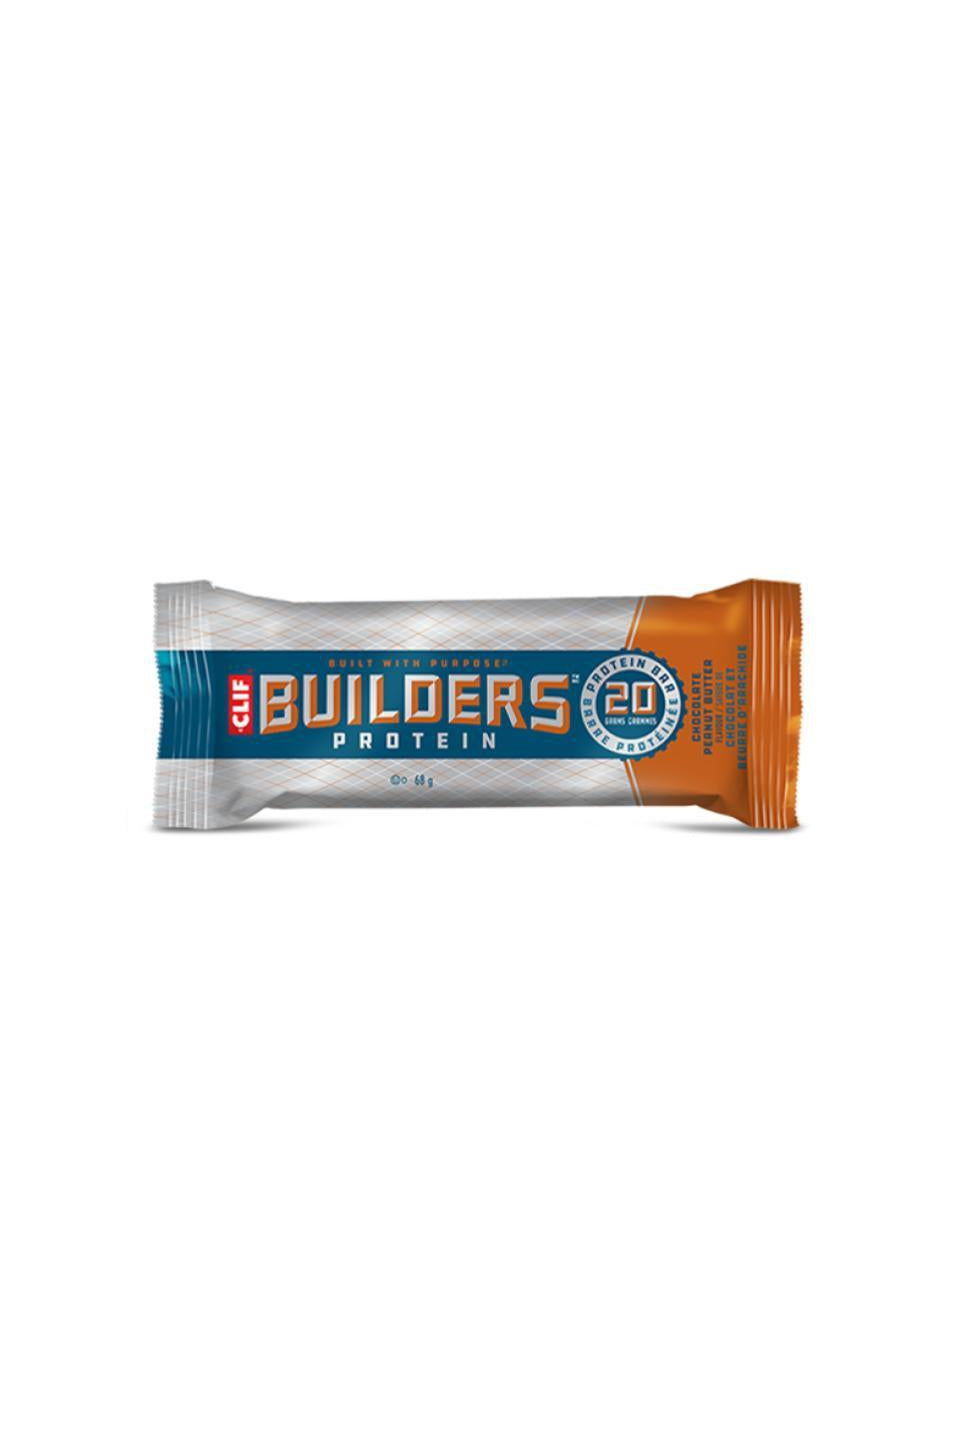 Clif Builders Protein - Chocolate Peanut Butter 68g